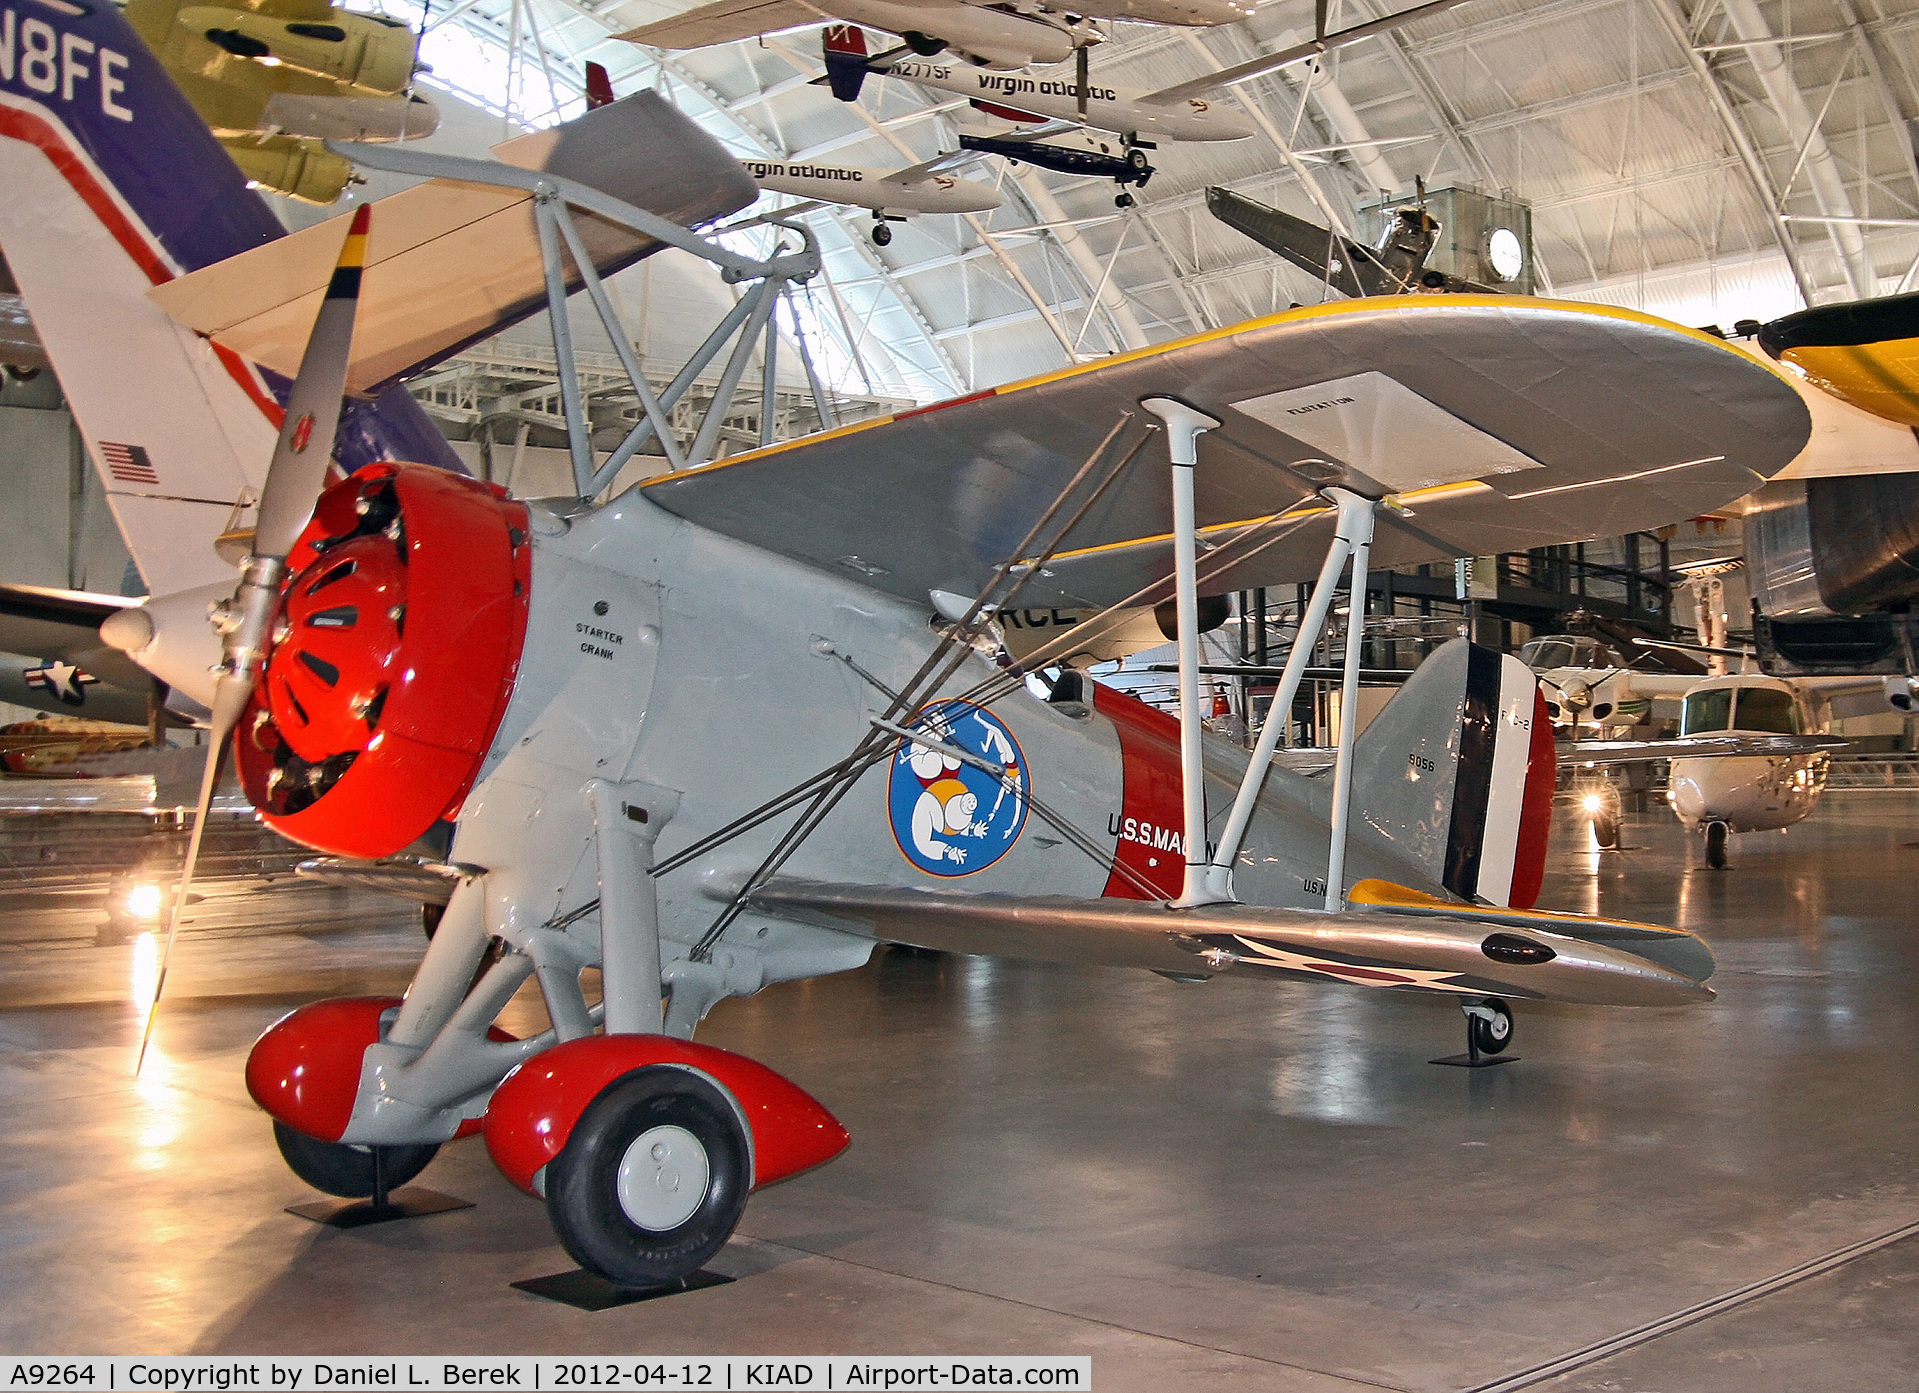 A9264, 1932 Curtiss F9C-2 Sparrowhawk C/N 0000, This aircraft was stationed aboard the U.S.S. Macon before that airship crashed.  She was restored with fictitious serial no. A9056.